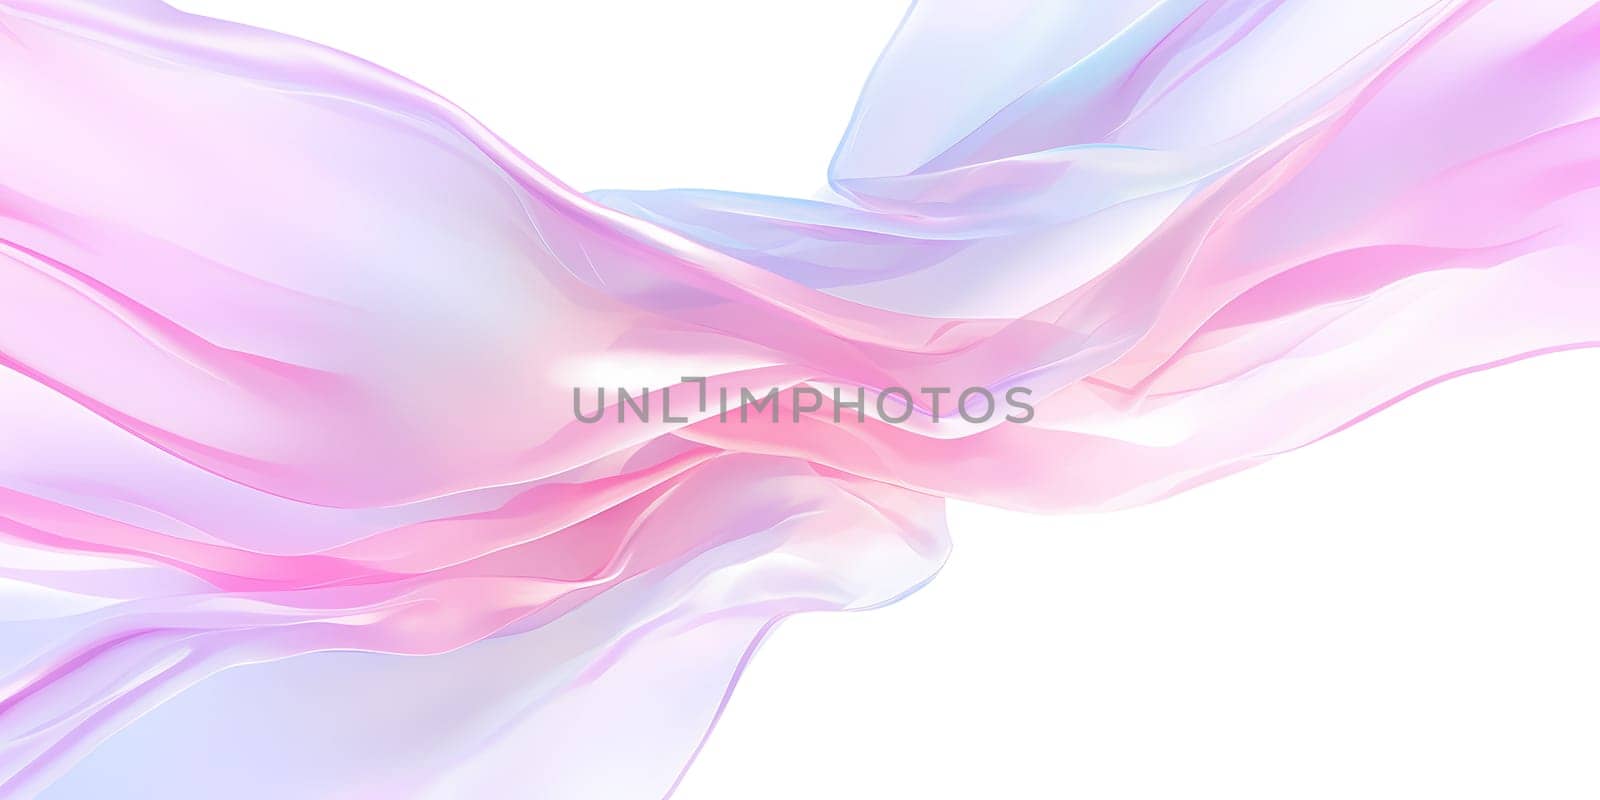 A pink and purple abstract background featuring flowing silk. by evdakovka